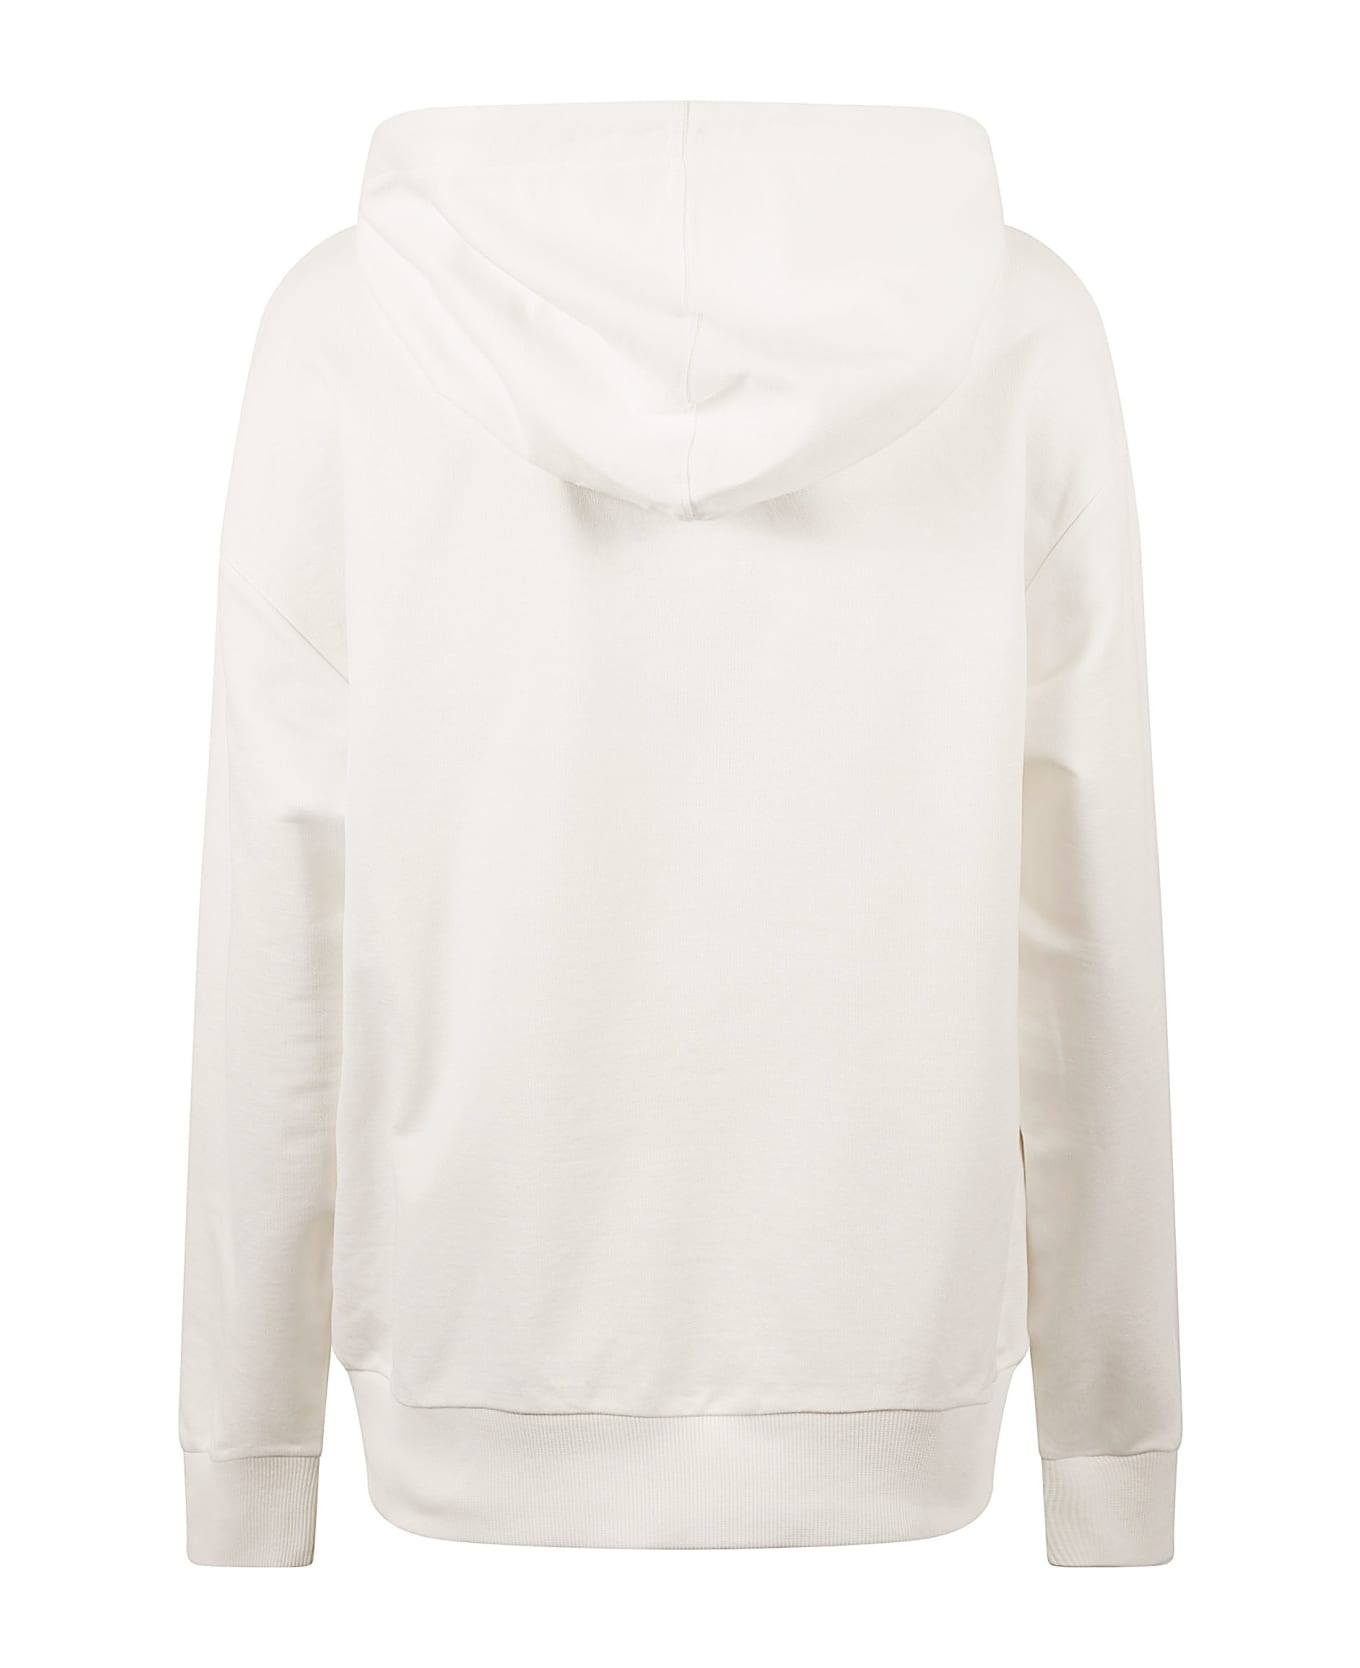 Moncler Chest Logo Patch Hooded Sweatshirt - White